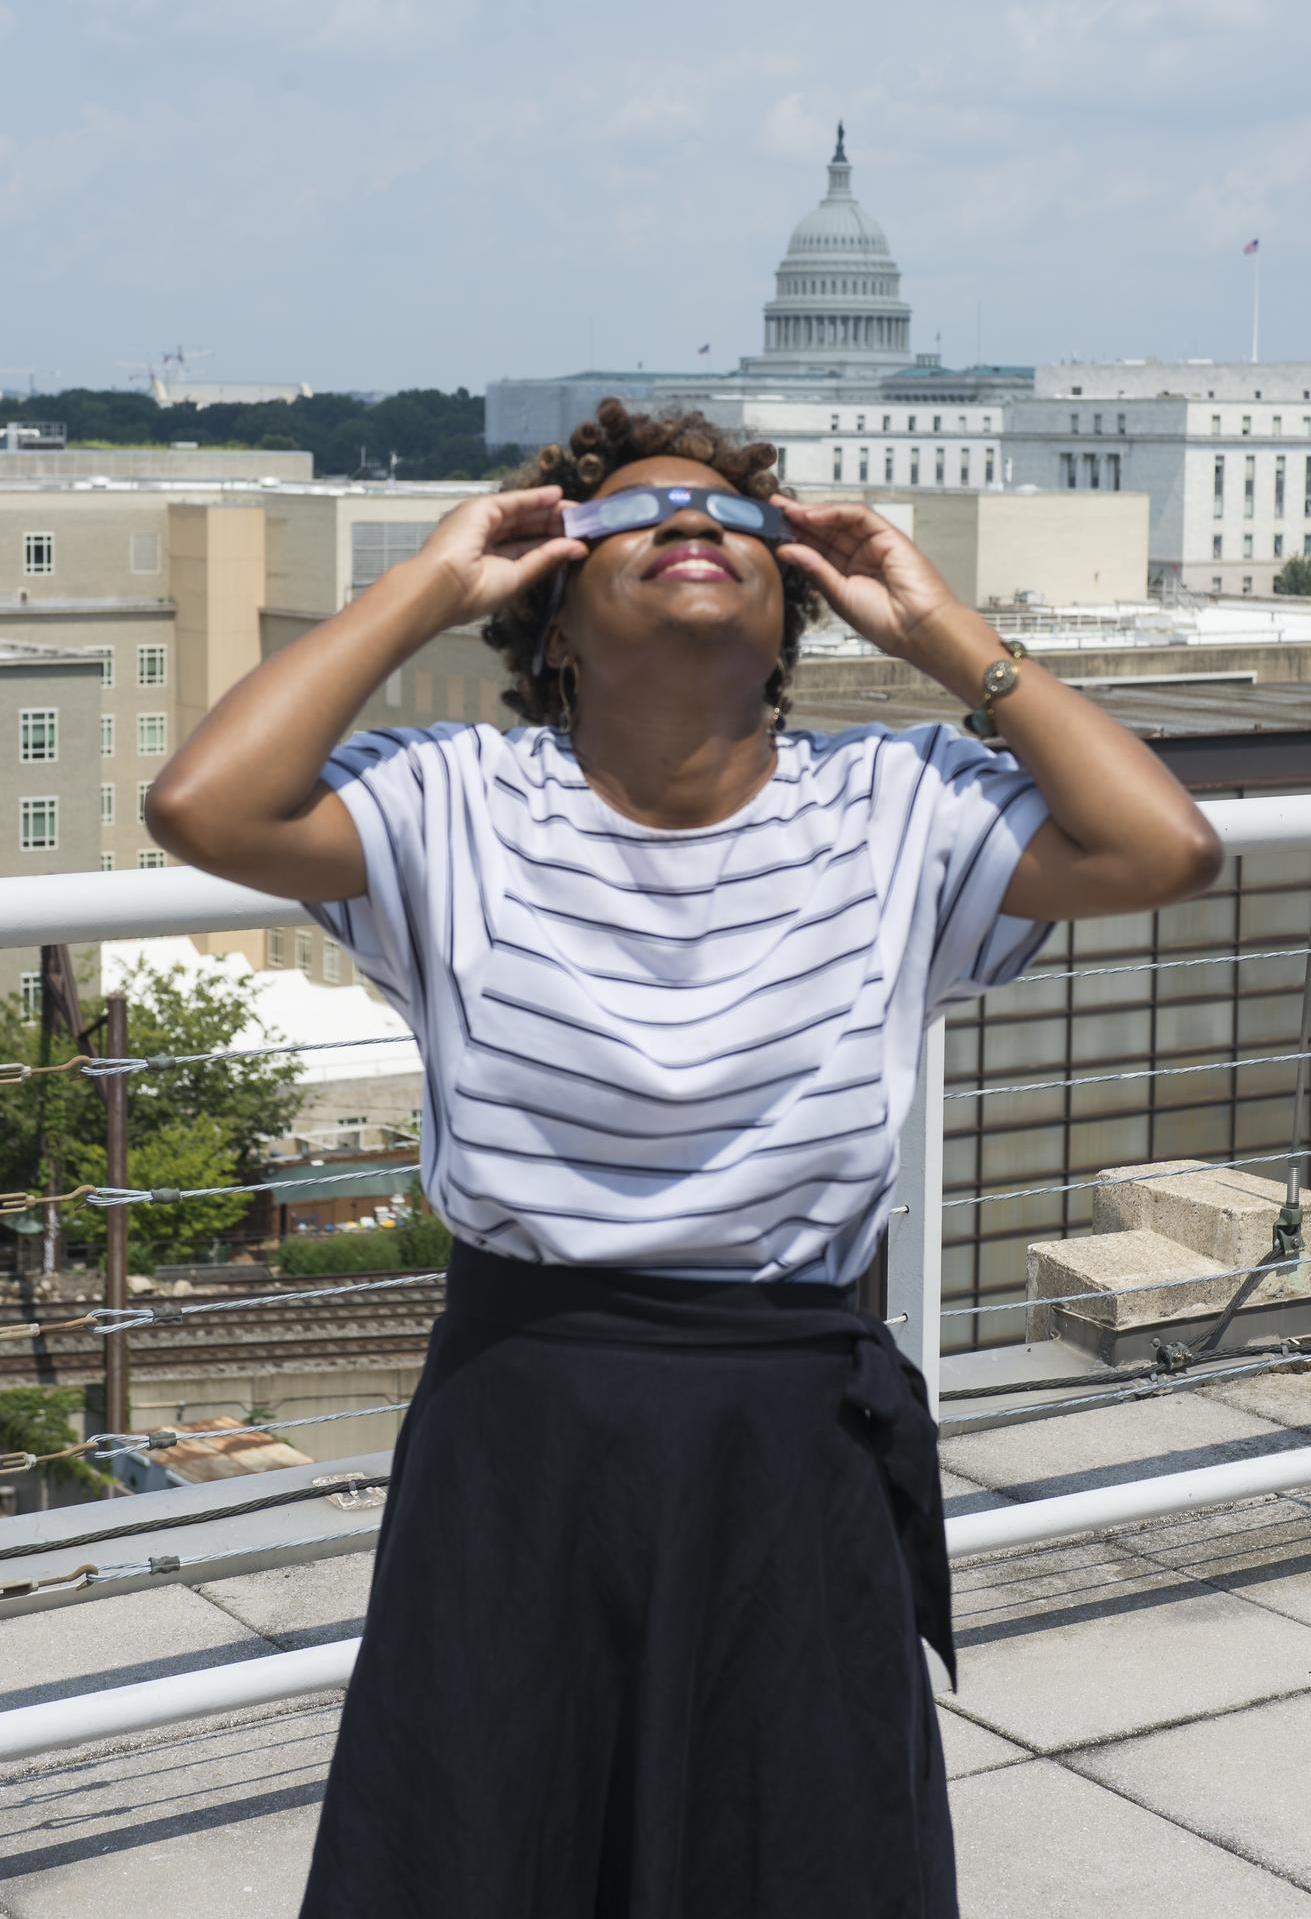 A woman stands on a rooftop, wearing eclipse classes, staring up at the sky.